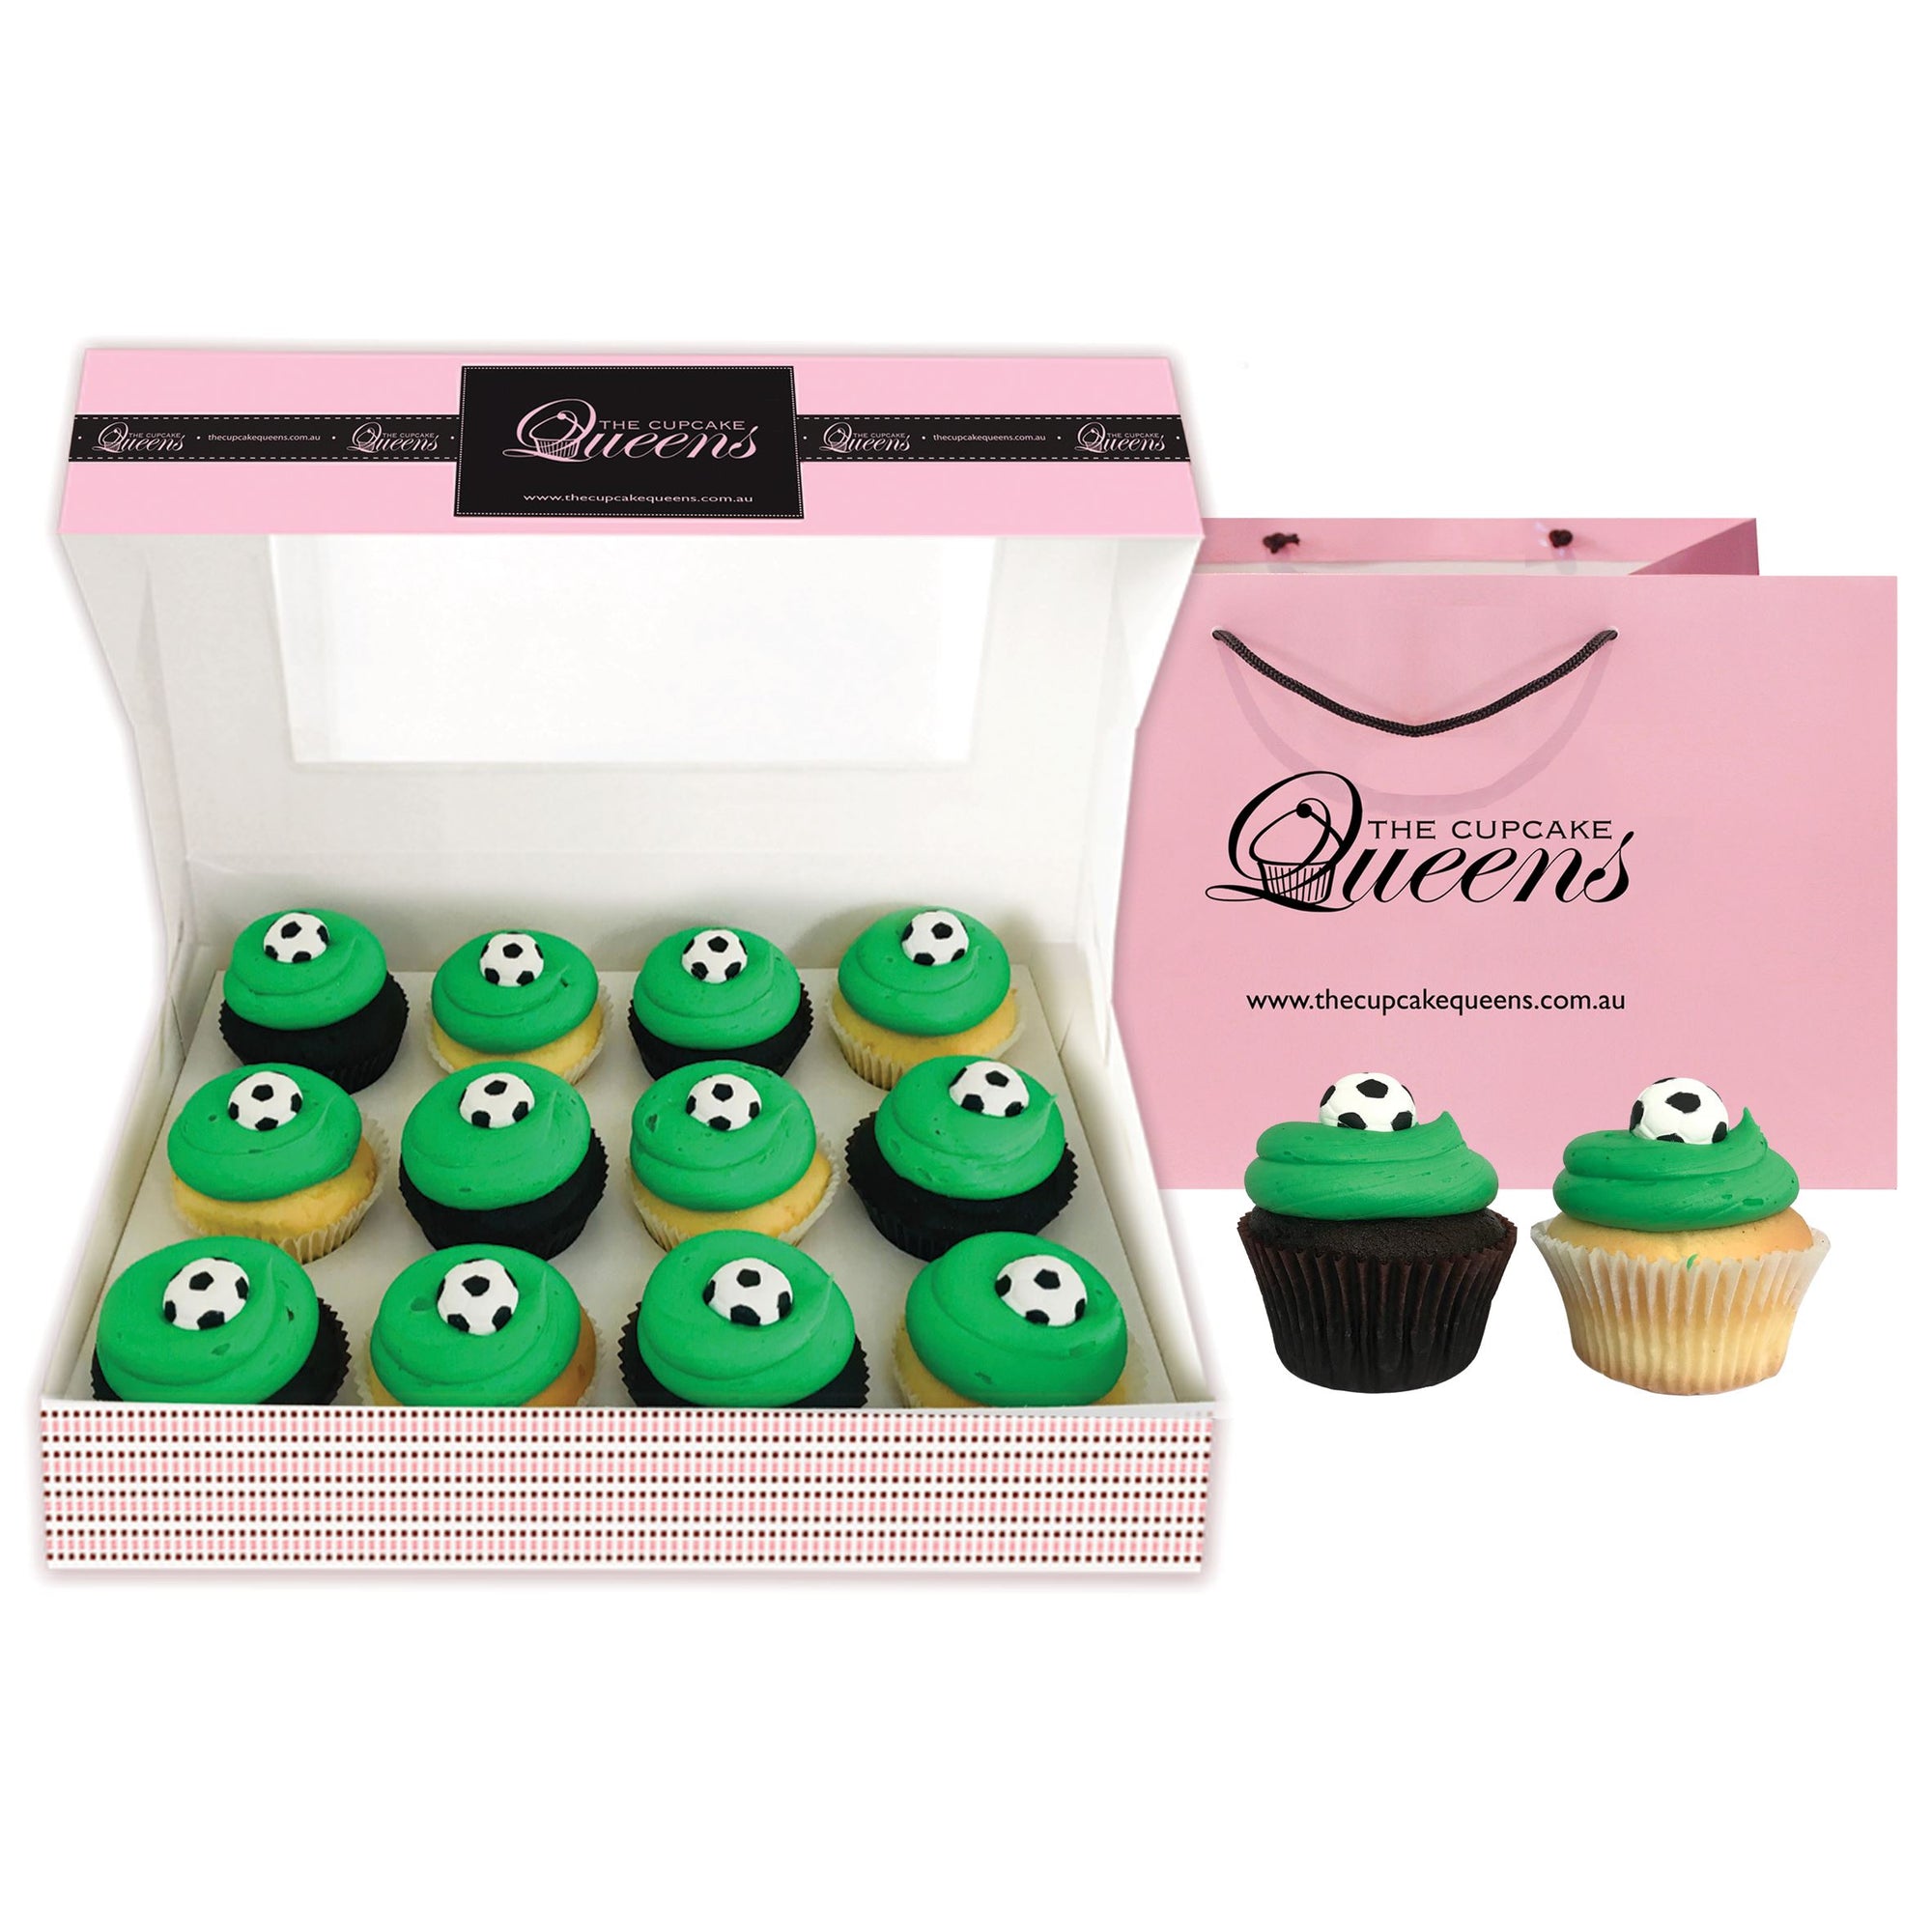 Soccer Goals Gift Box Cupcakes The Cupcake Queens 